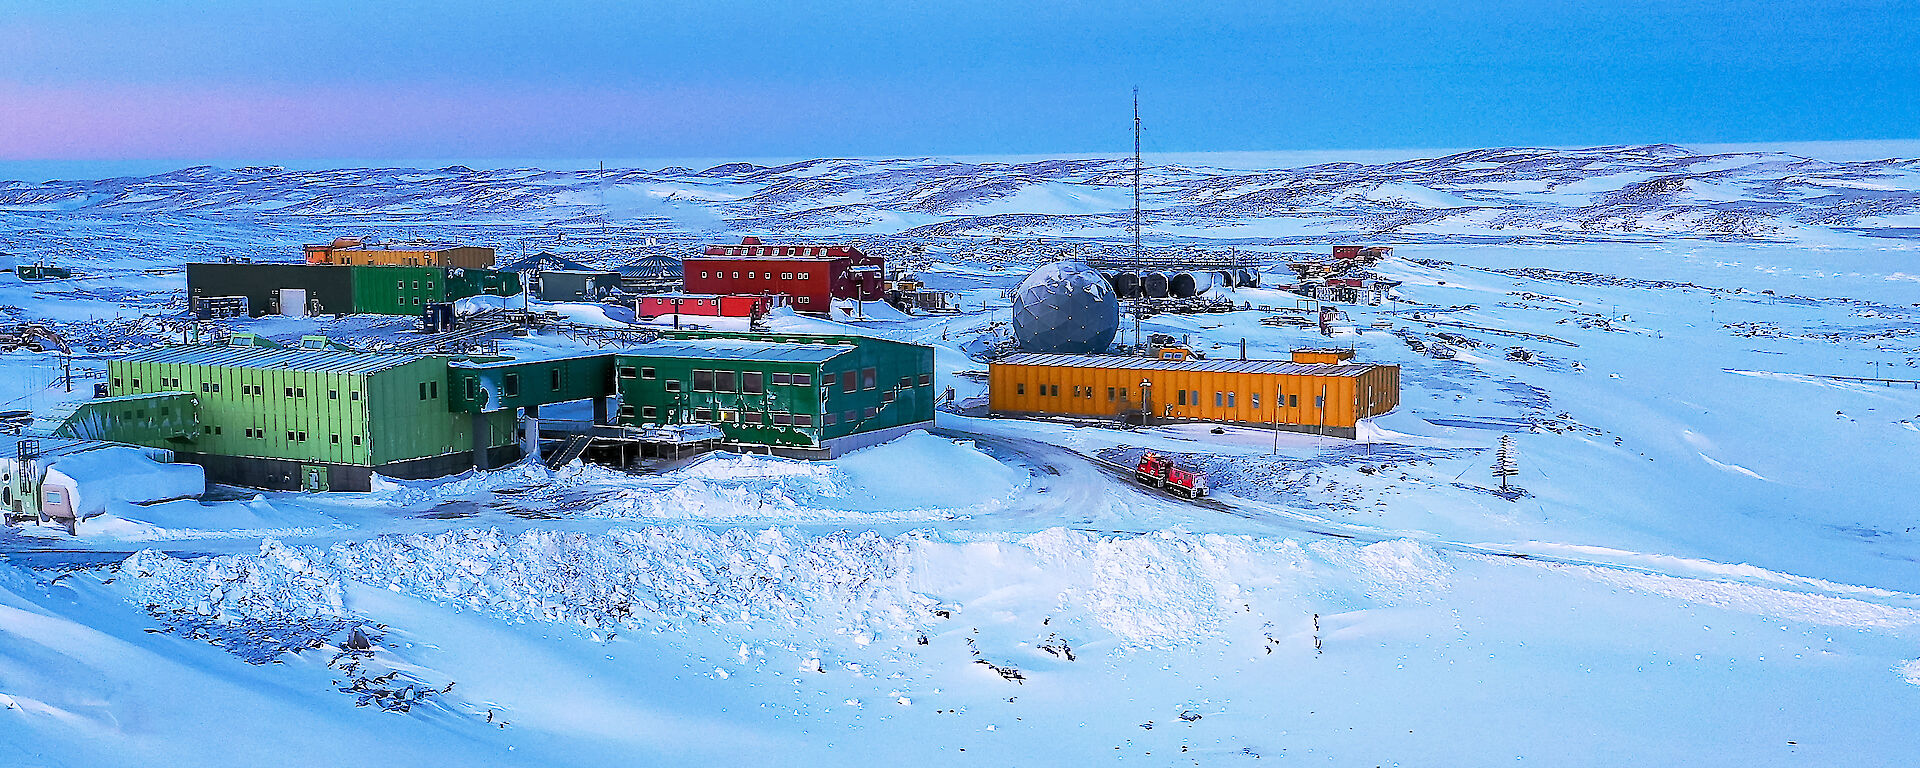 Brightly coloured buildings in snowy landscape under a clear sky